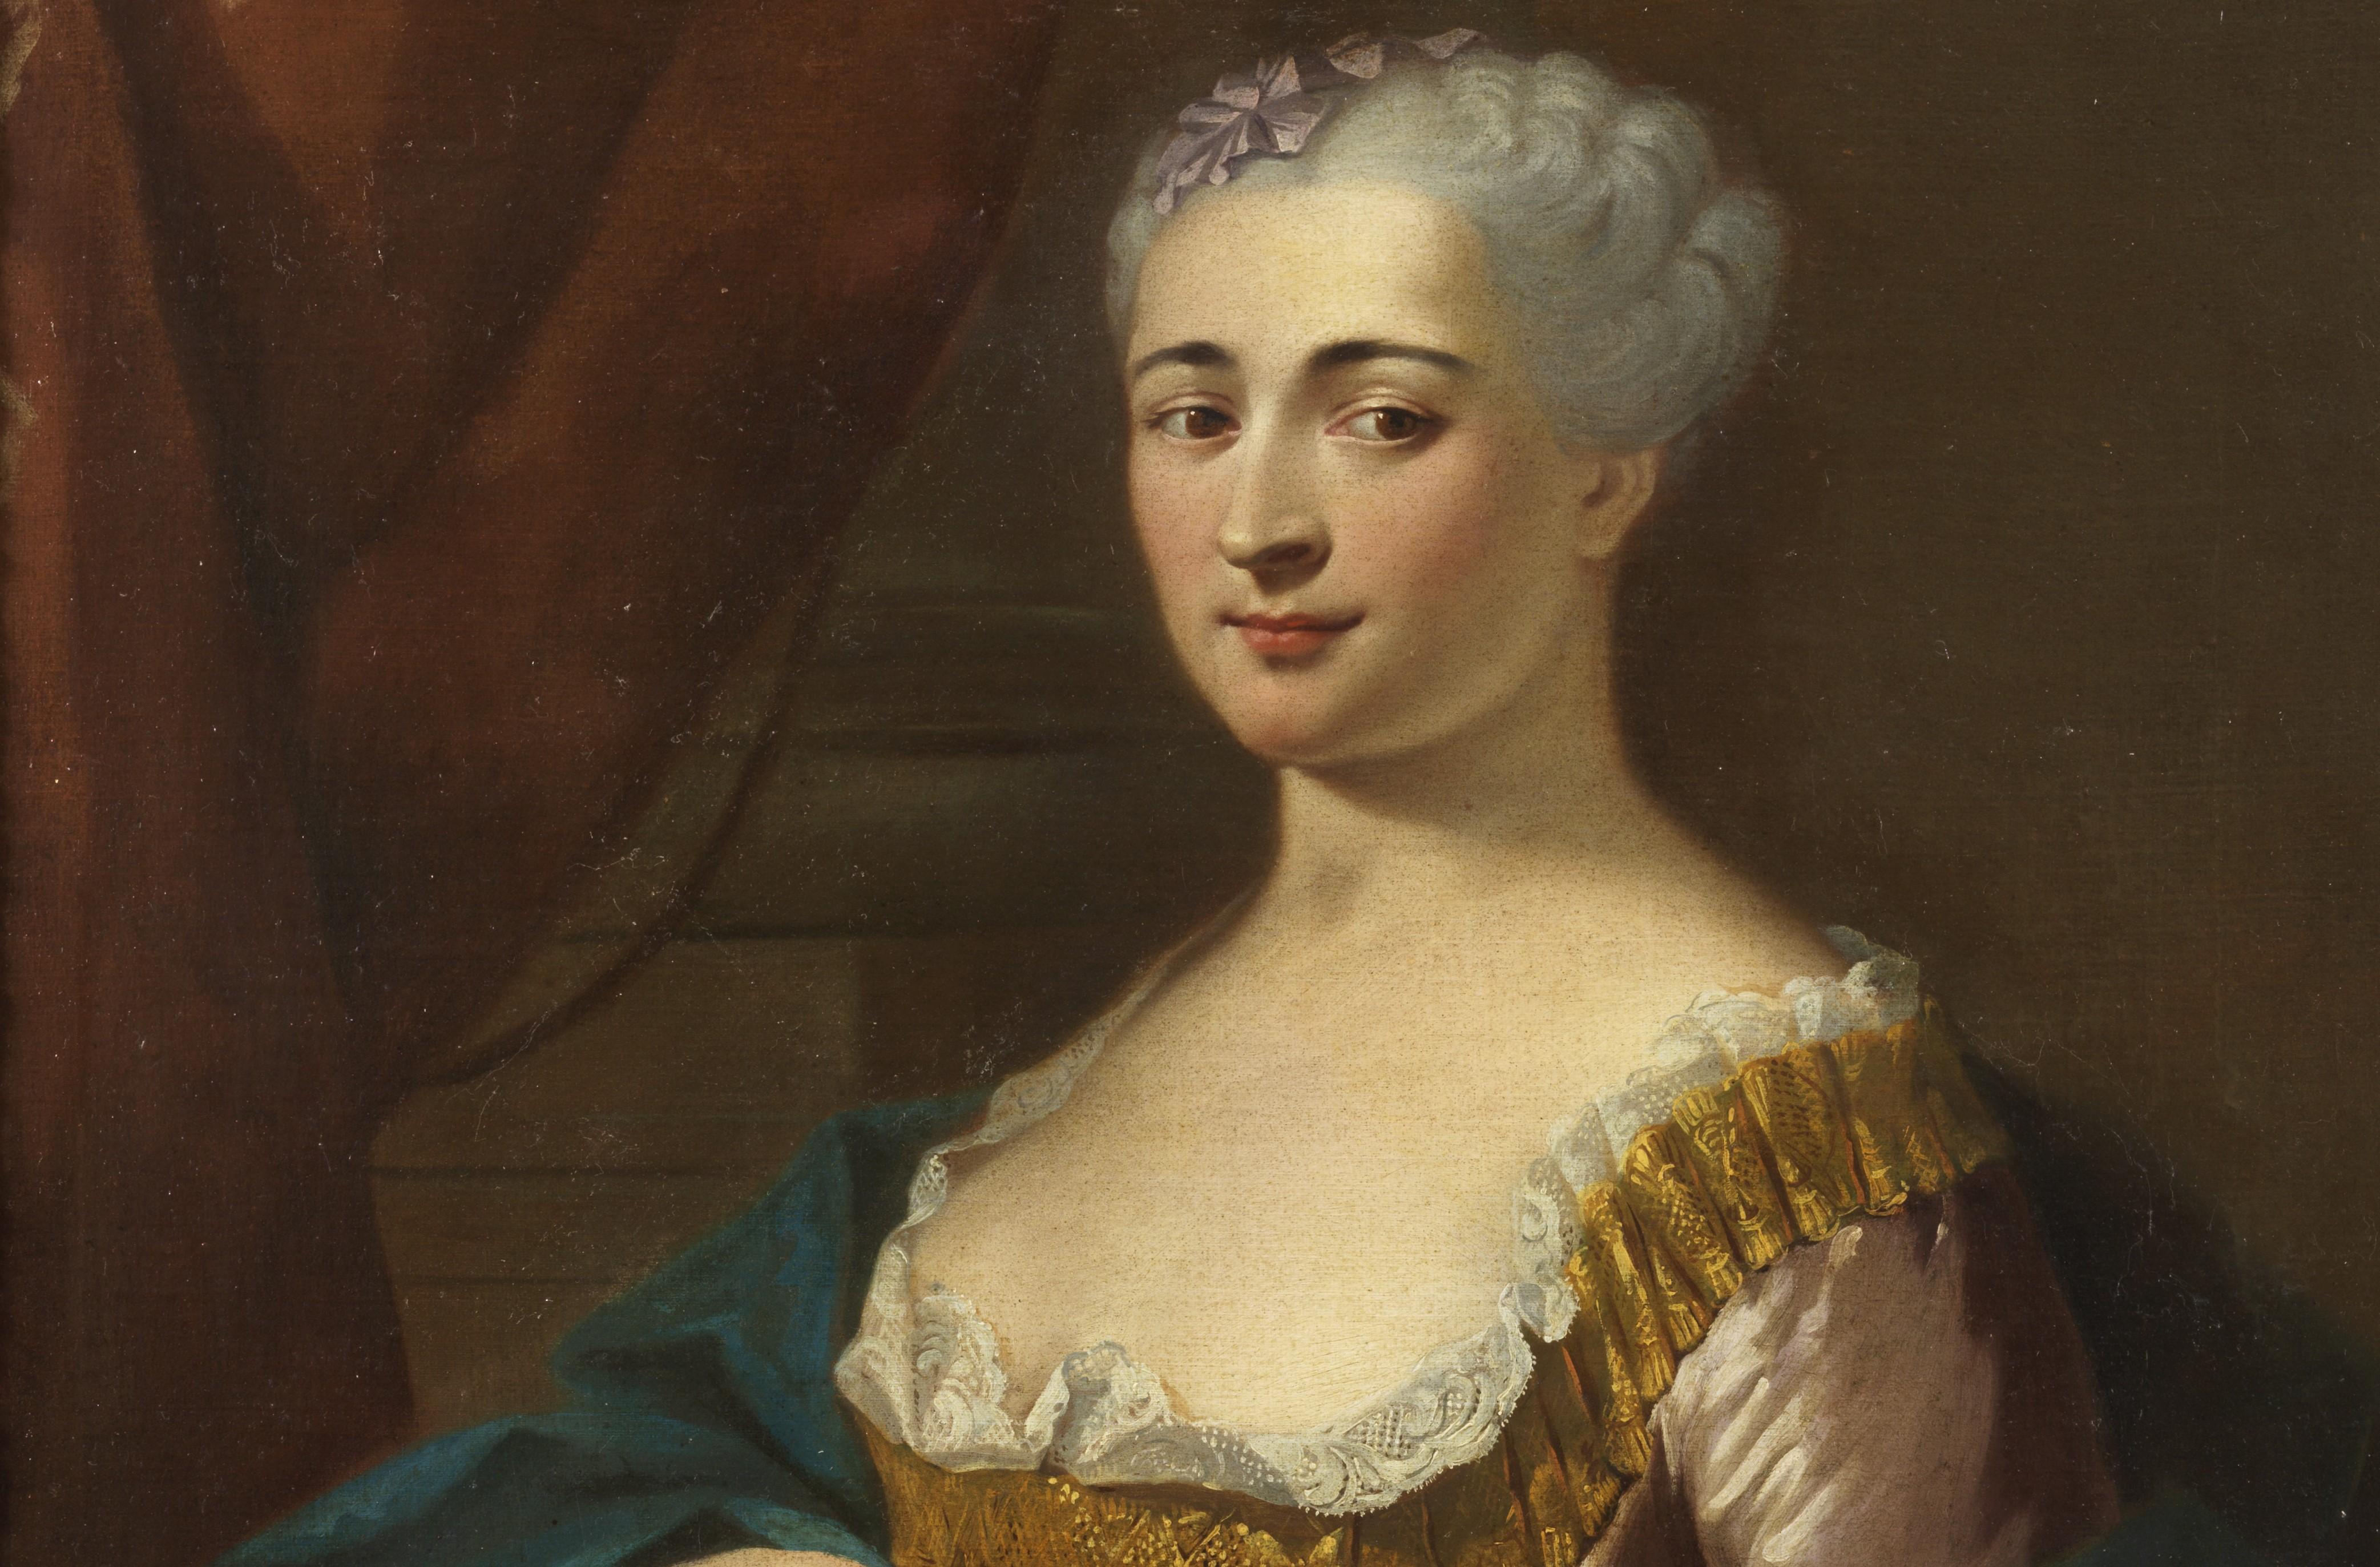 Painting oil on canvas measuring 92 x 75 cm without frame and 102 x 87 cm with frame depicting a rich lady of the French school of the first half of the 18th century.

In its formal simplification, this simple image with the unkempt hair with the